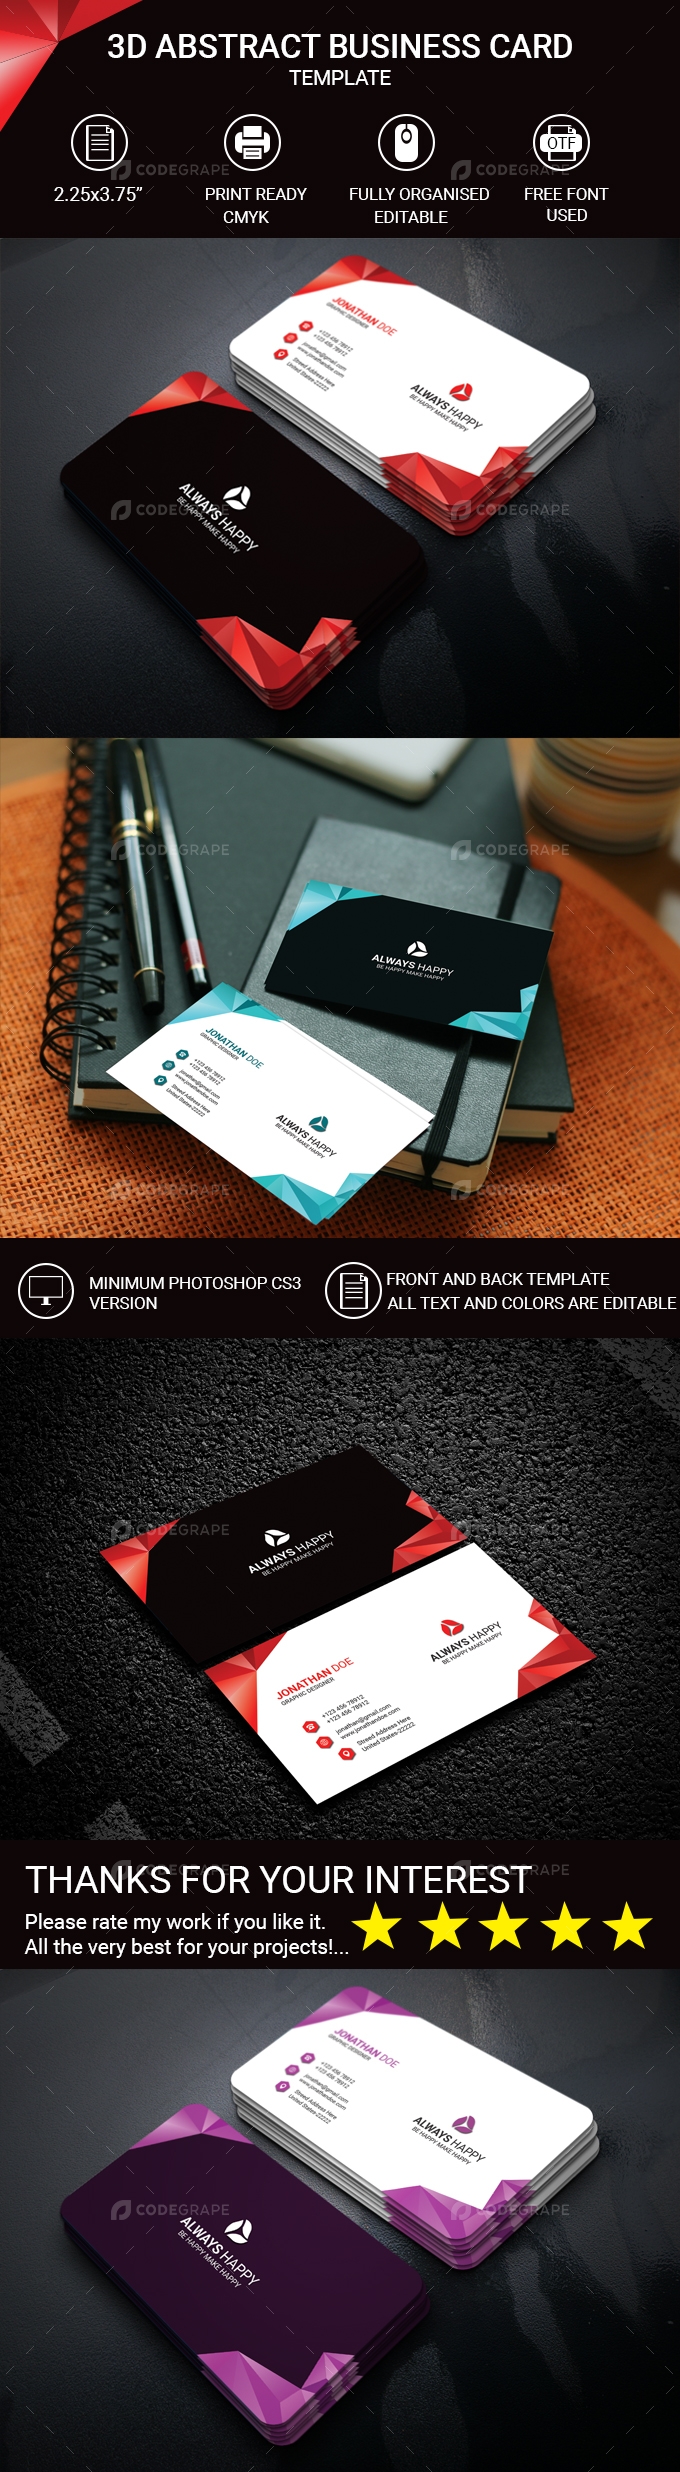 3D Abstract Business Card